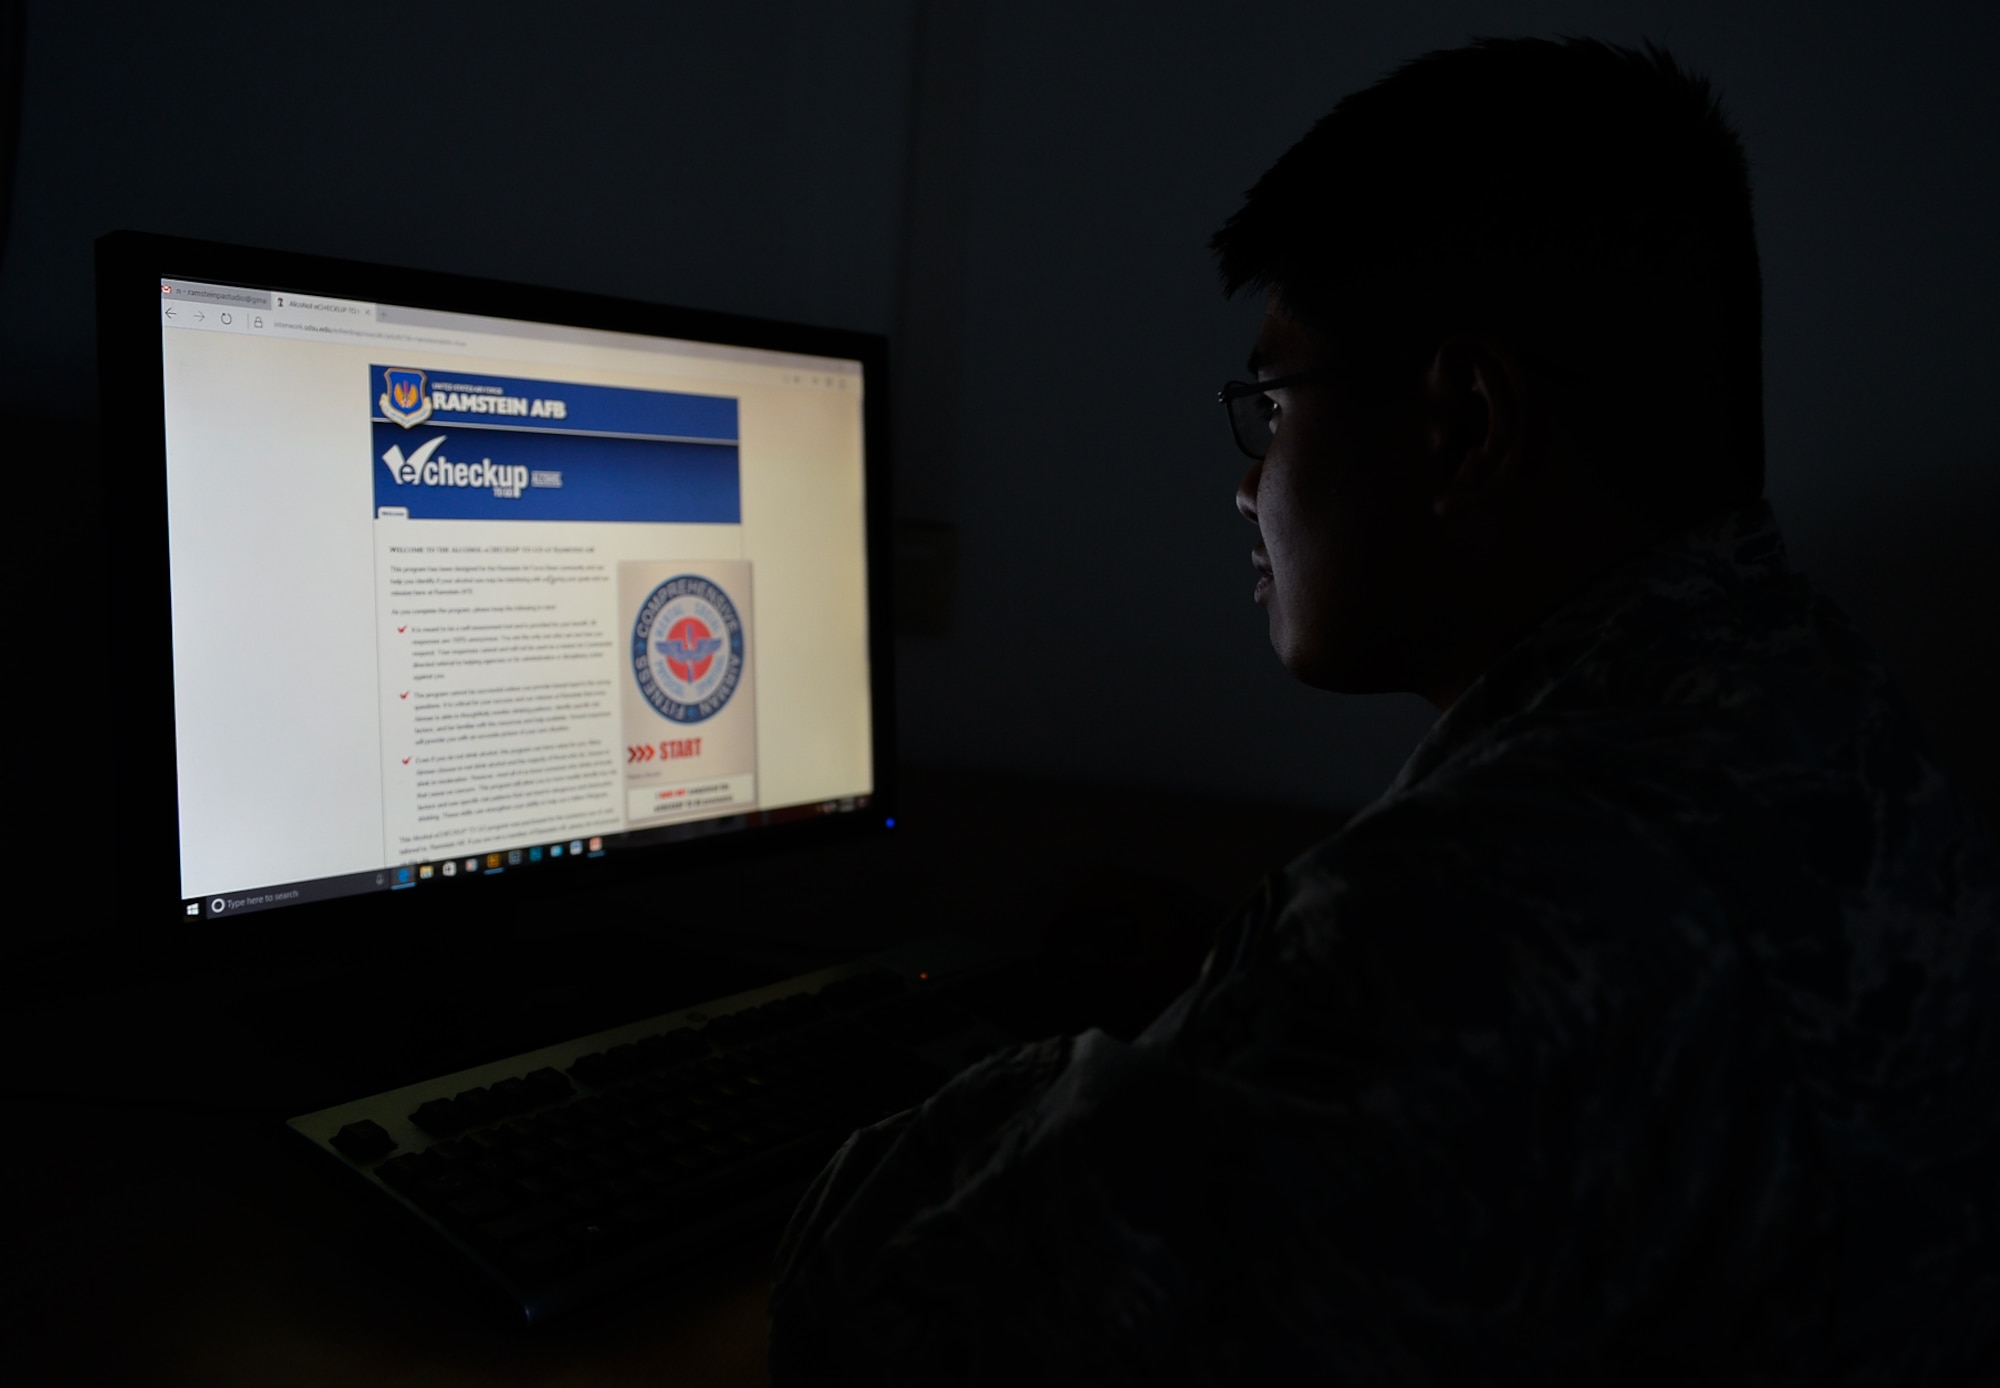 An Airman visits the Alcohol e-CheckUpToGo program website on Ramstein Air Base, Germany, May 4, 2017. The Alcohol e-CheckUpToGo program, designed by university counseling center psychologists from San Diego State University, is an anonymous, evidence-based, personalized online alcohol intervention that allows Airmen to enter information about their drinking patterns and receive feedback about their use of alcohol. (U.S. Air Force photo by Airman 1st Class Savannah L. Waters)